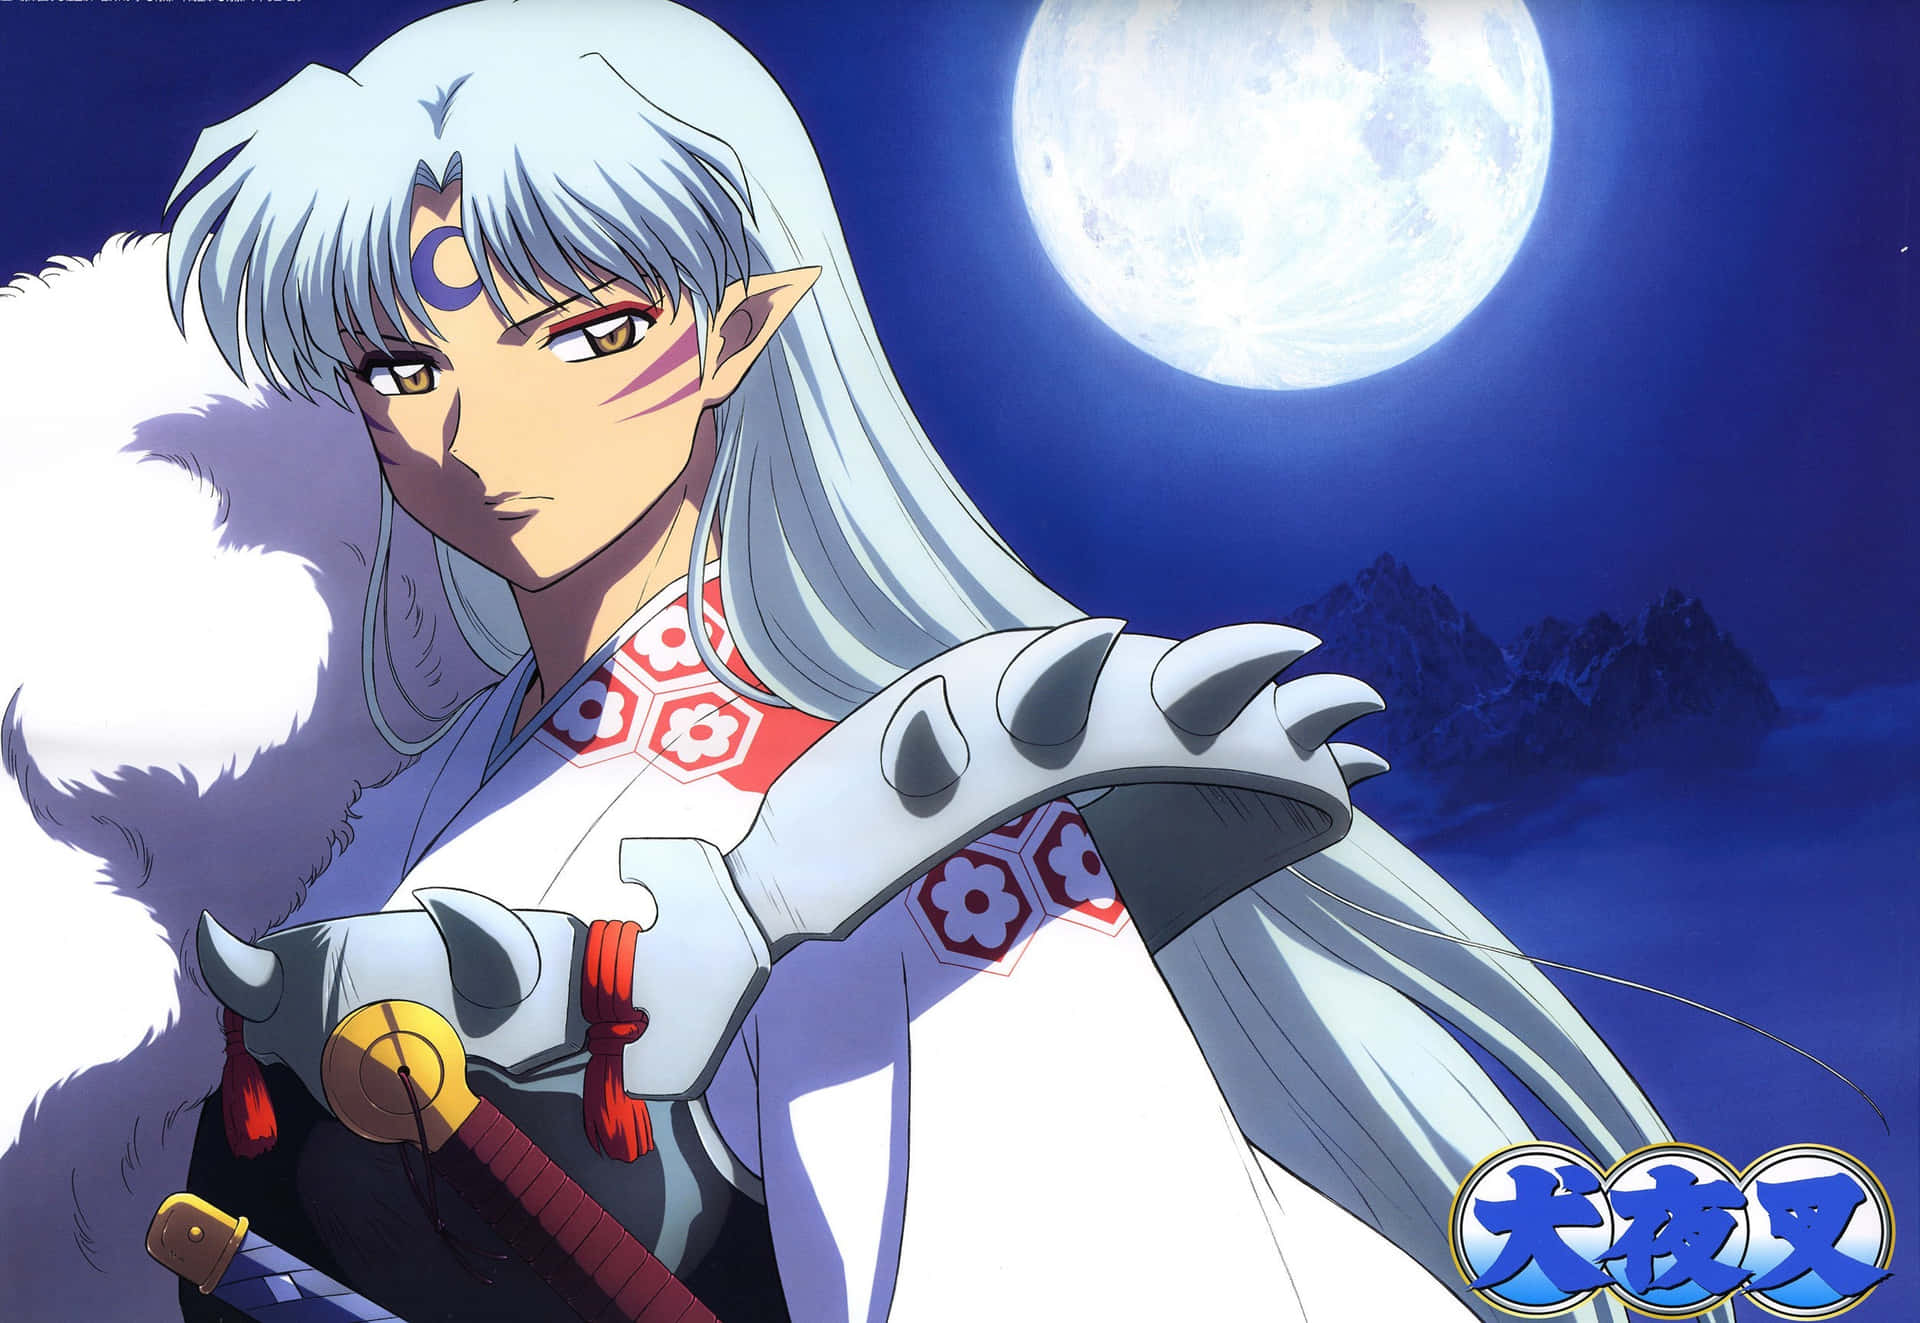 Sesshomaru, The Powerful Demon Lord, Stands Tall And Fierce.